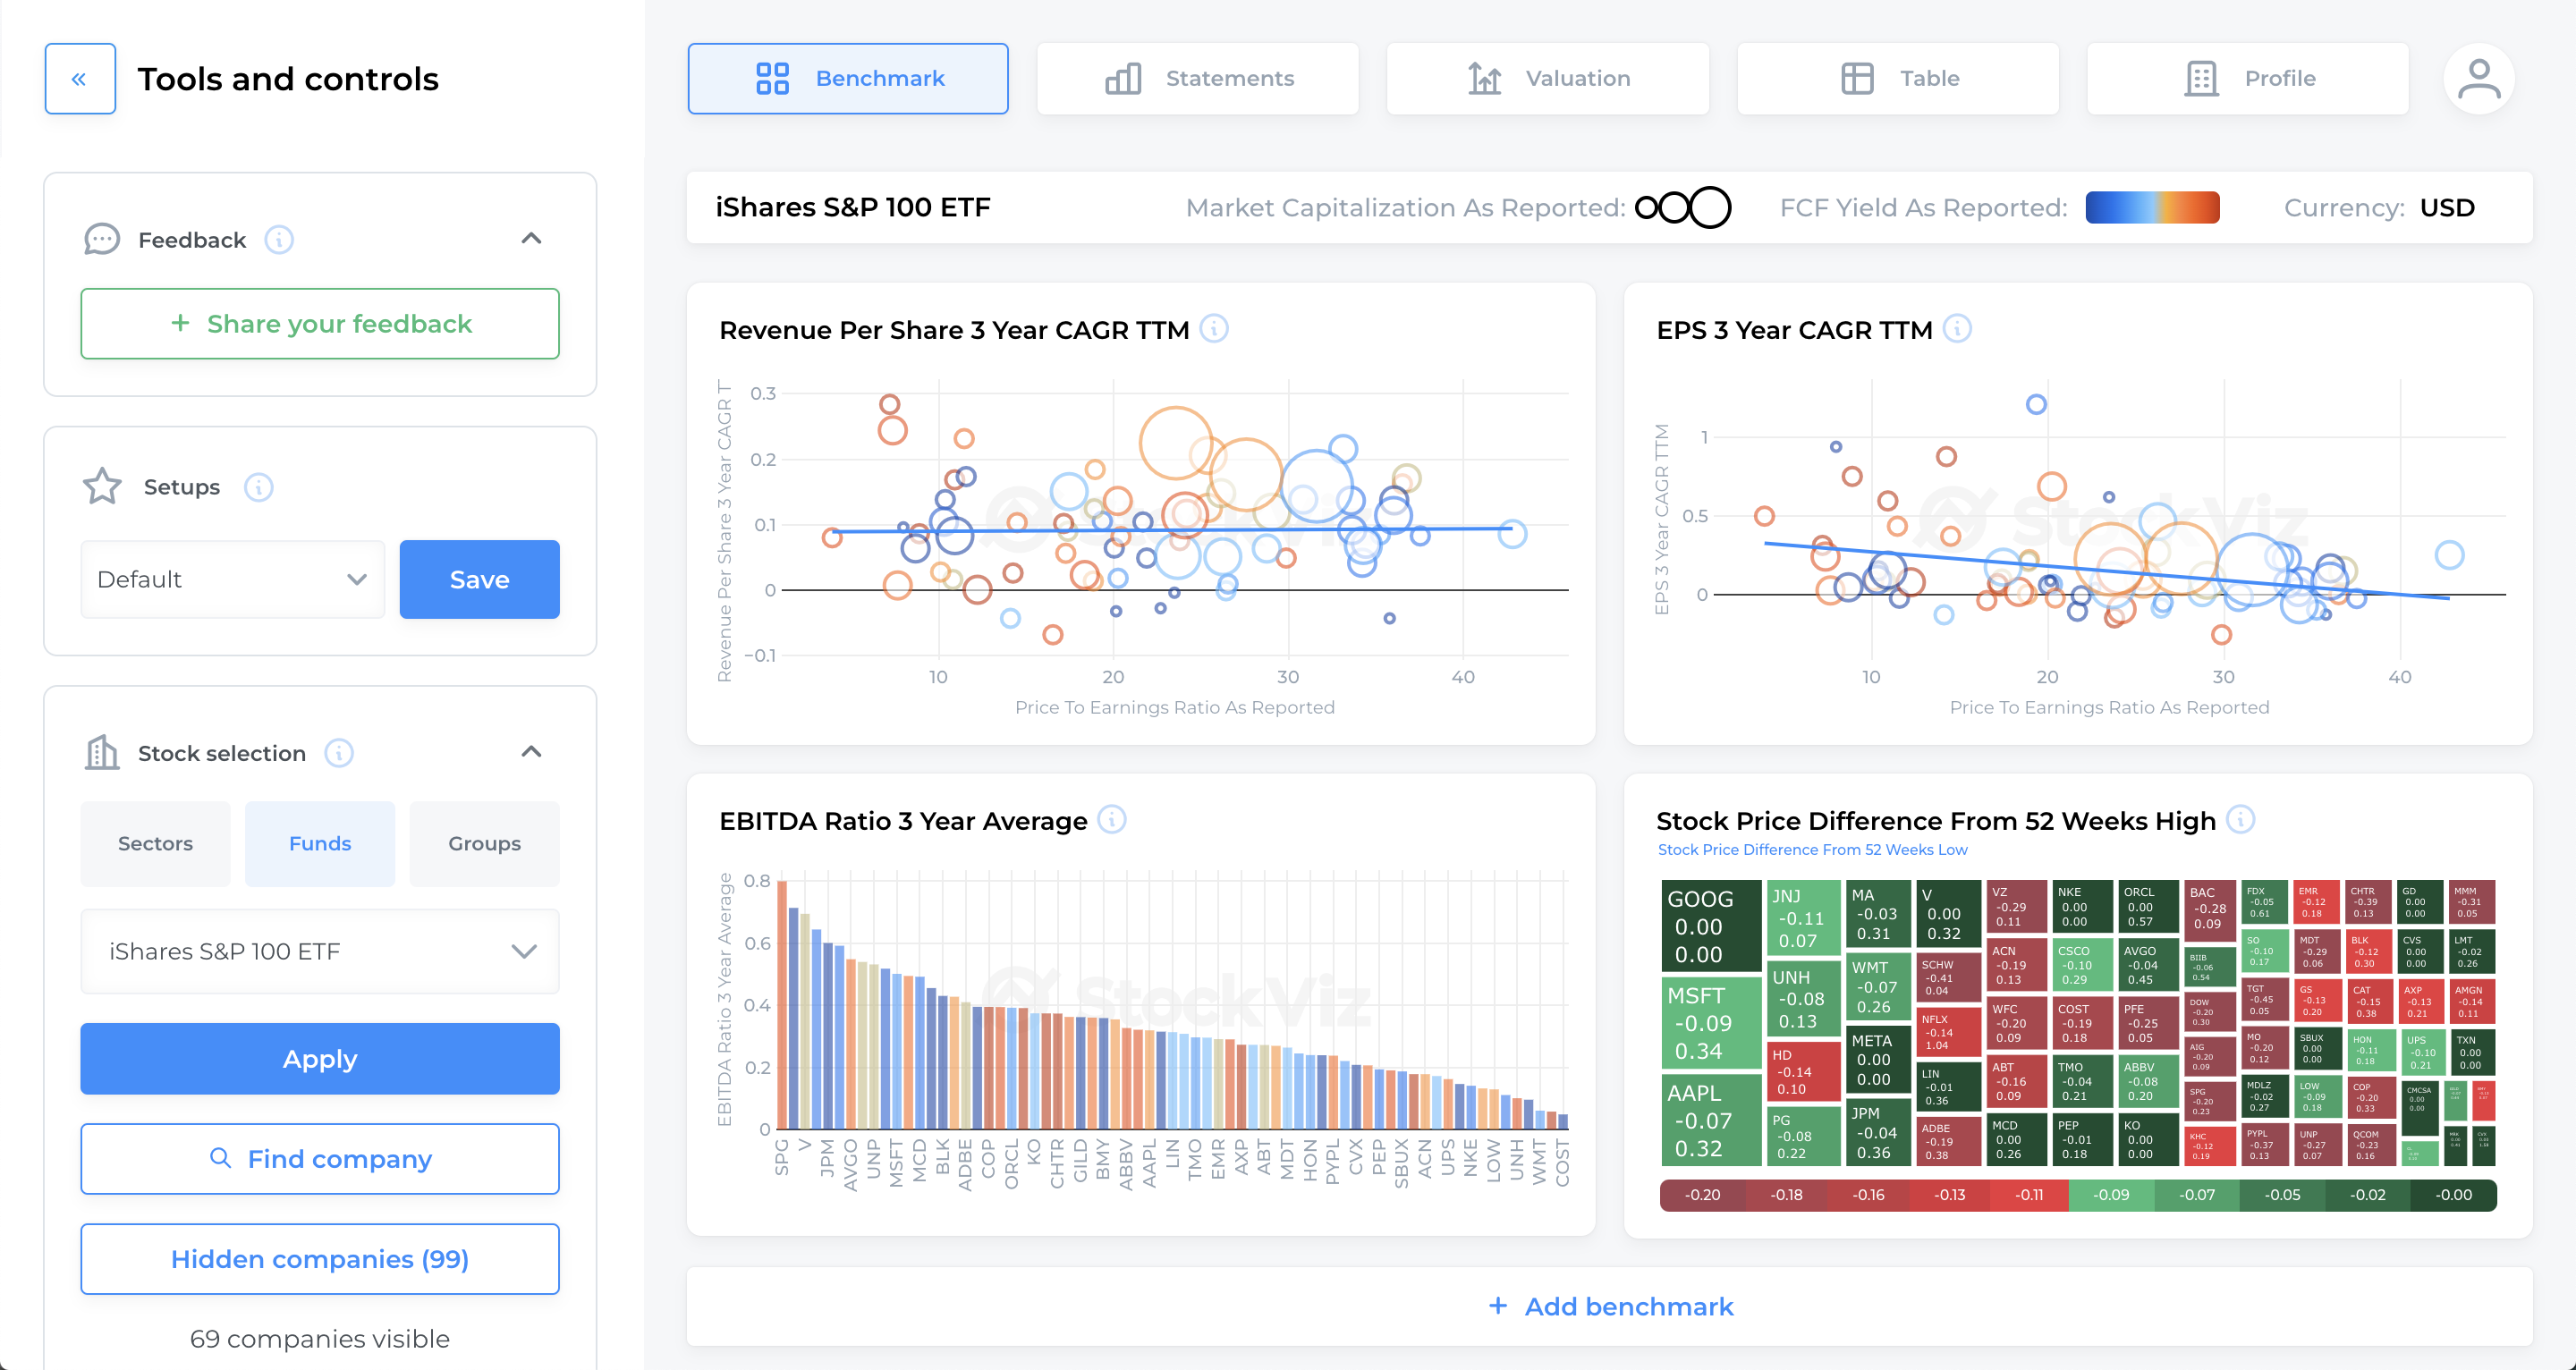 Visualize the performance of any stocks using scatterplots, bar charts, and heatmaps. Utilize the power of visual data to identify stocks that outperform or underperform their peers.